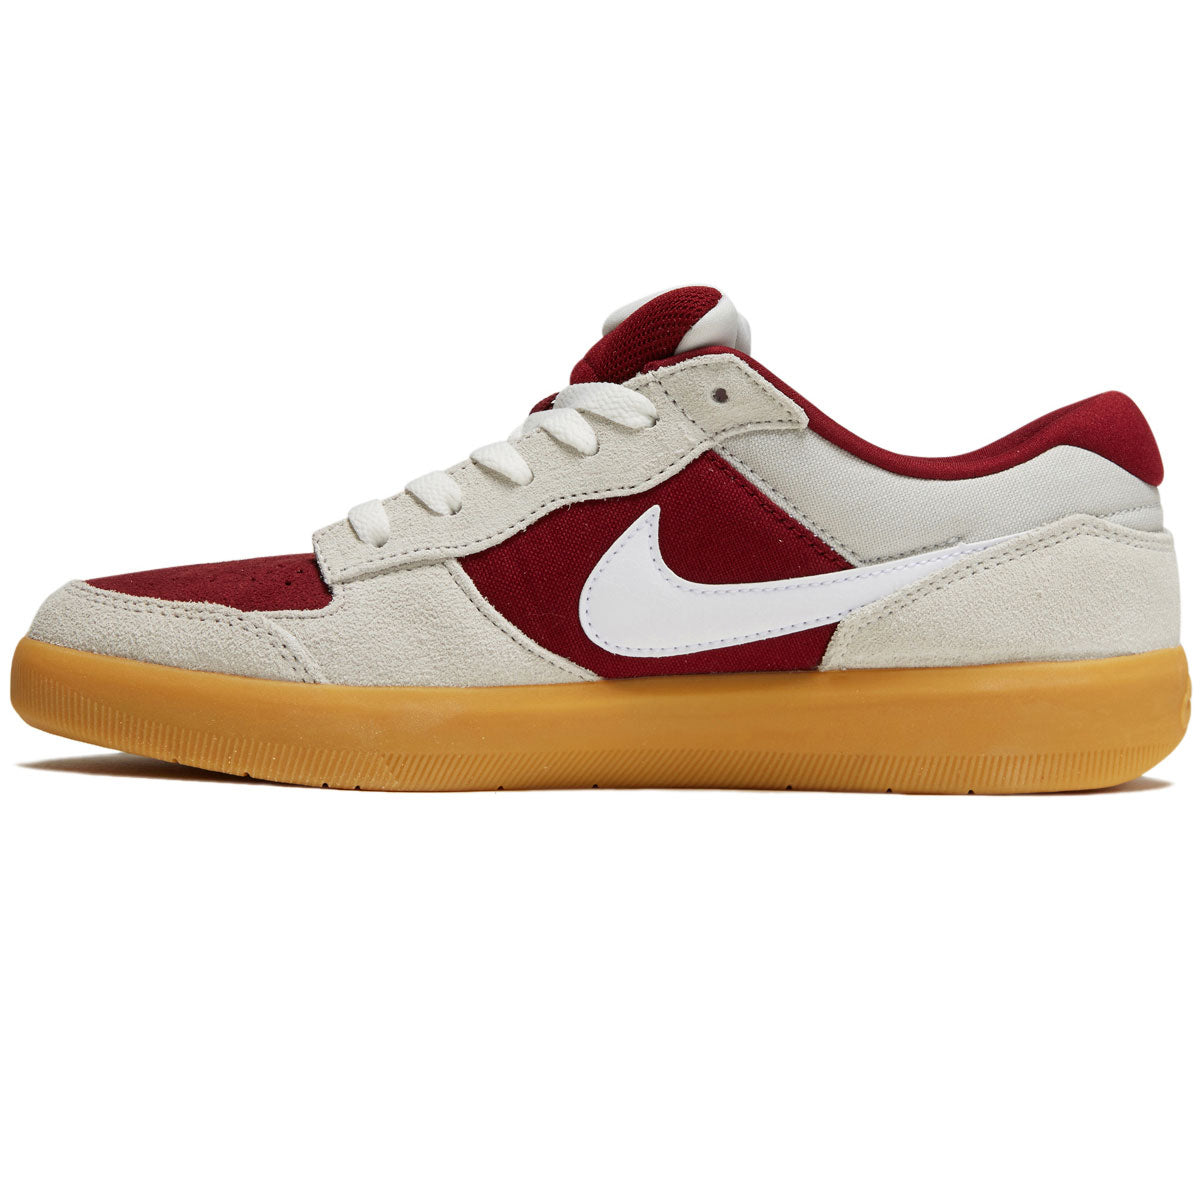 Nike SB Force 58 Shoes - Team Red/White/Summit White image 2